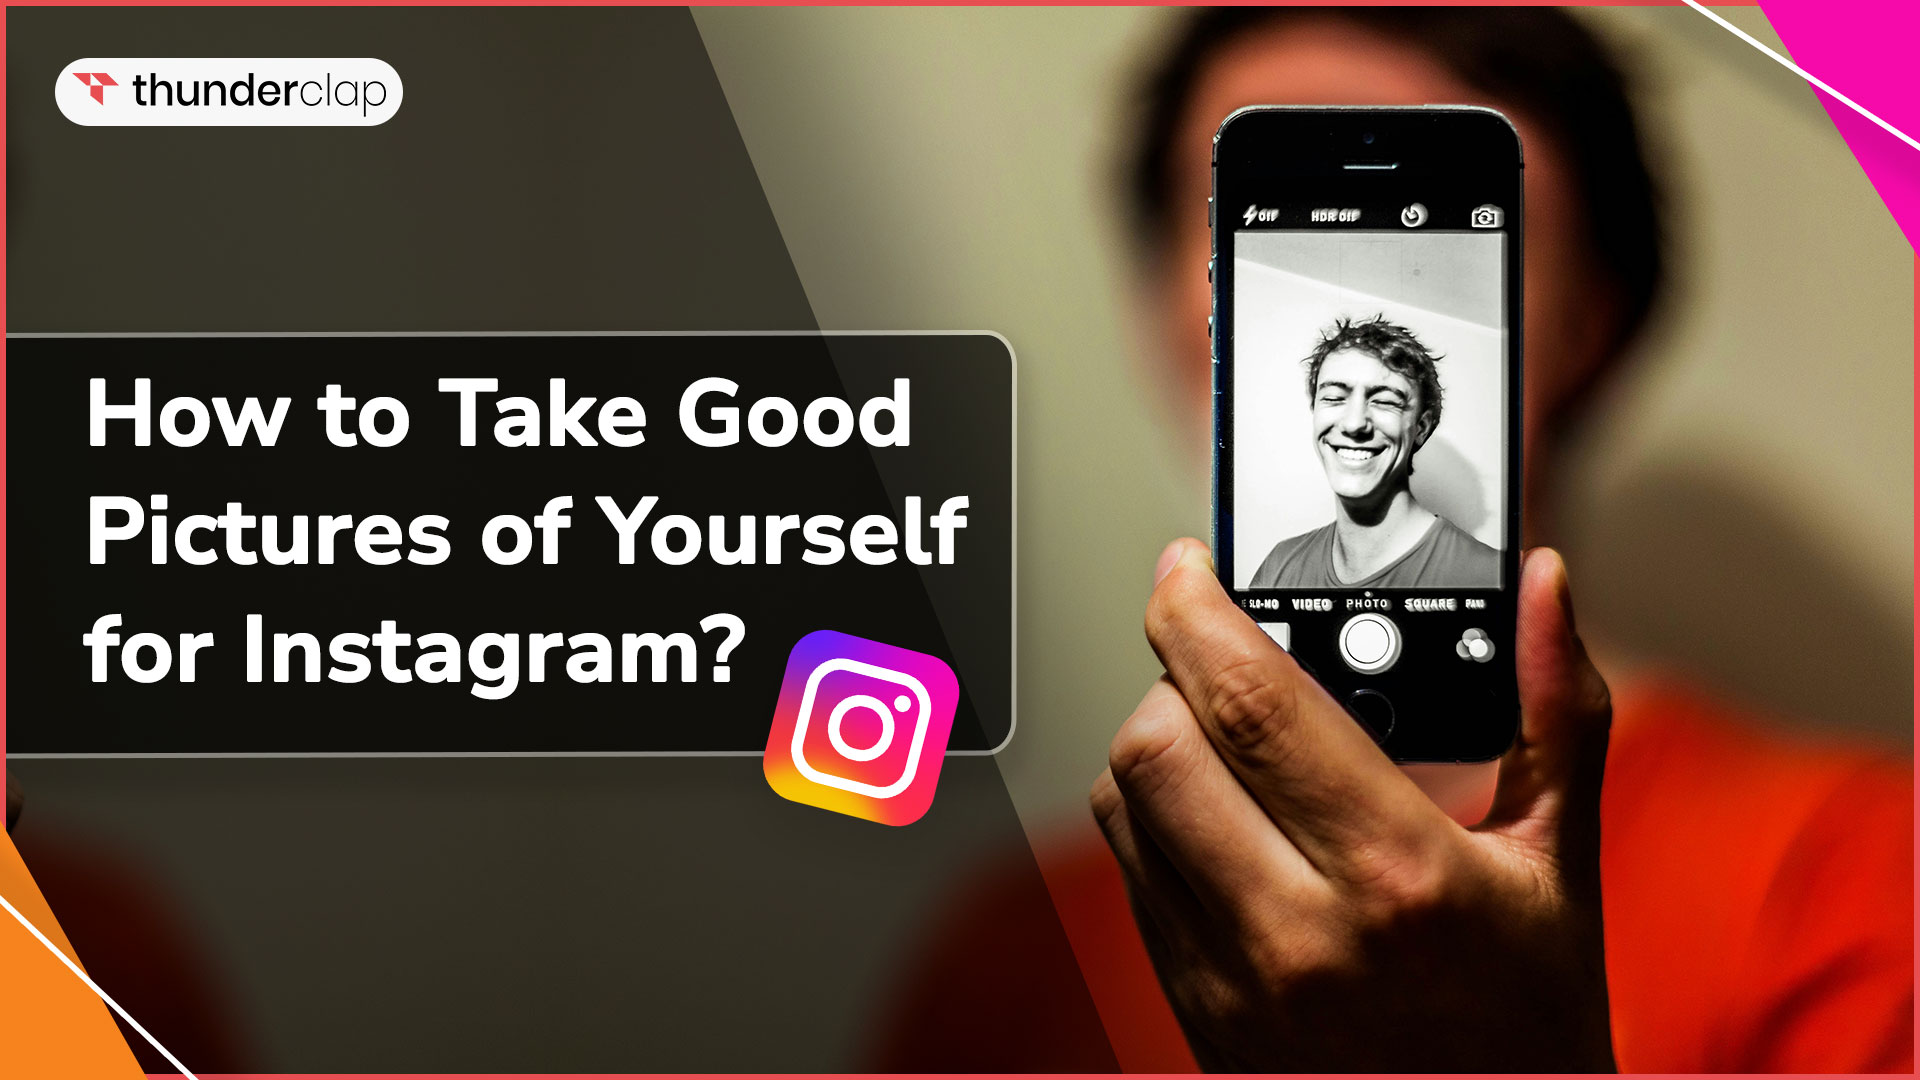 How to Take Good Pictures of Yourself for Instagram?